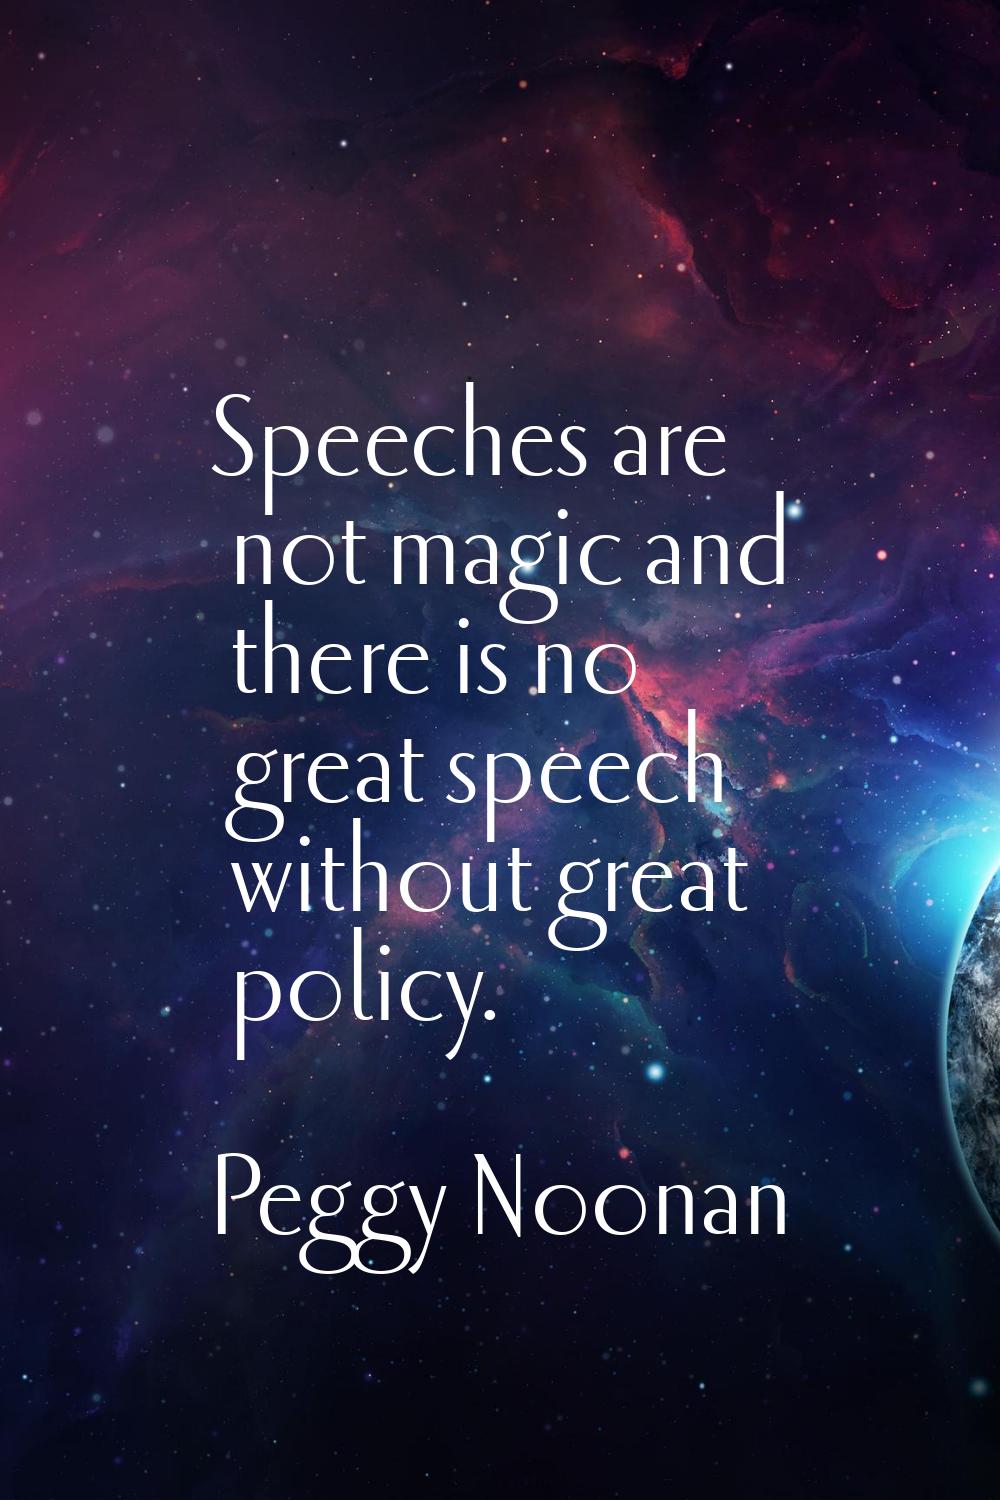 Speeches are not magic and there is no great speech without great policy.